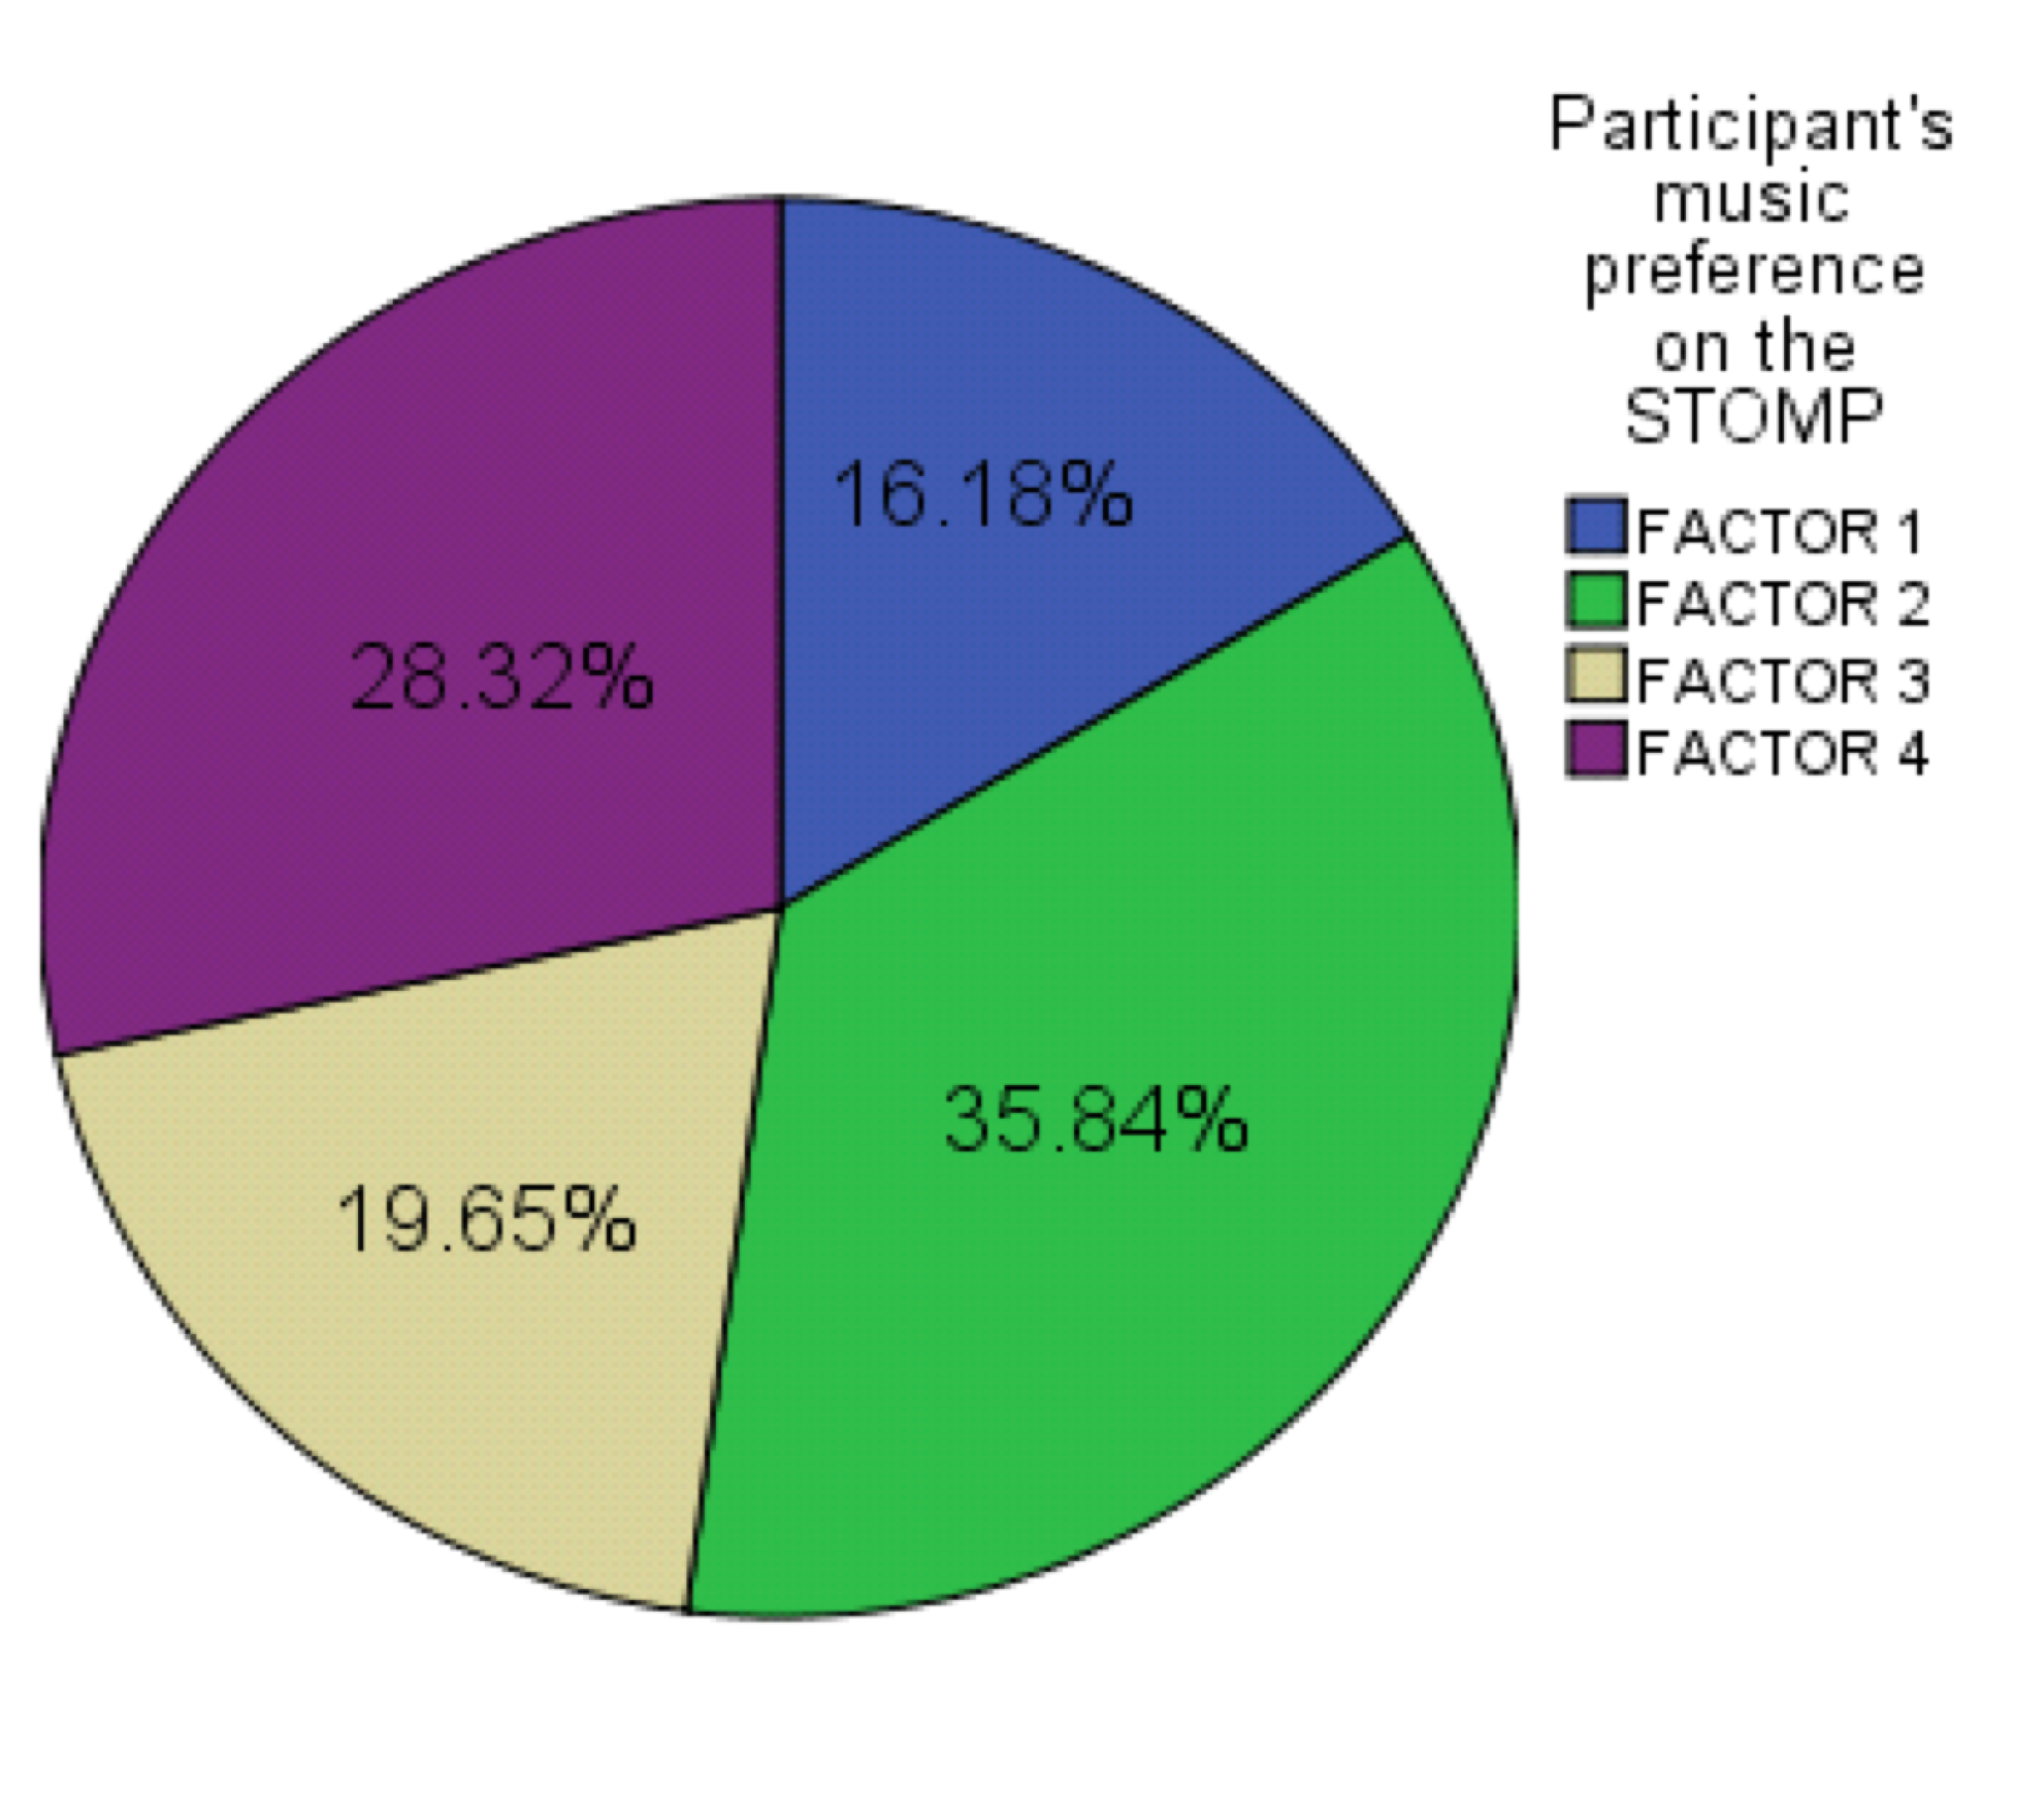 Pie chart showing the STOMP Music Factor Percentages for the study participants classed as 'younger'